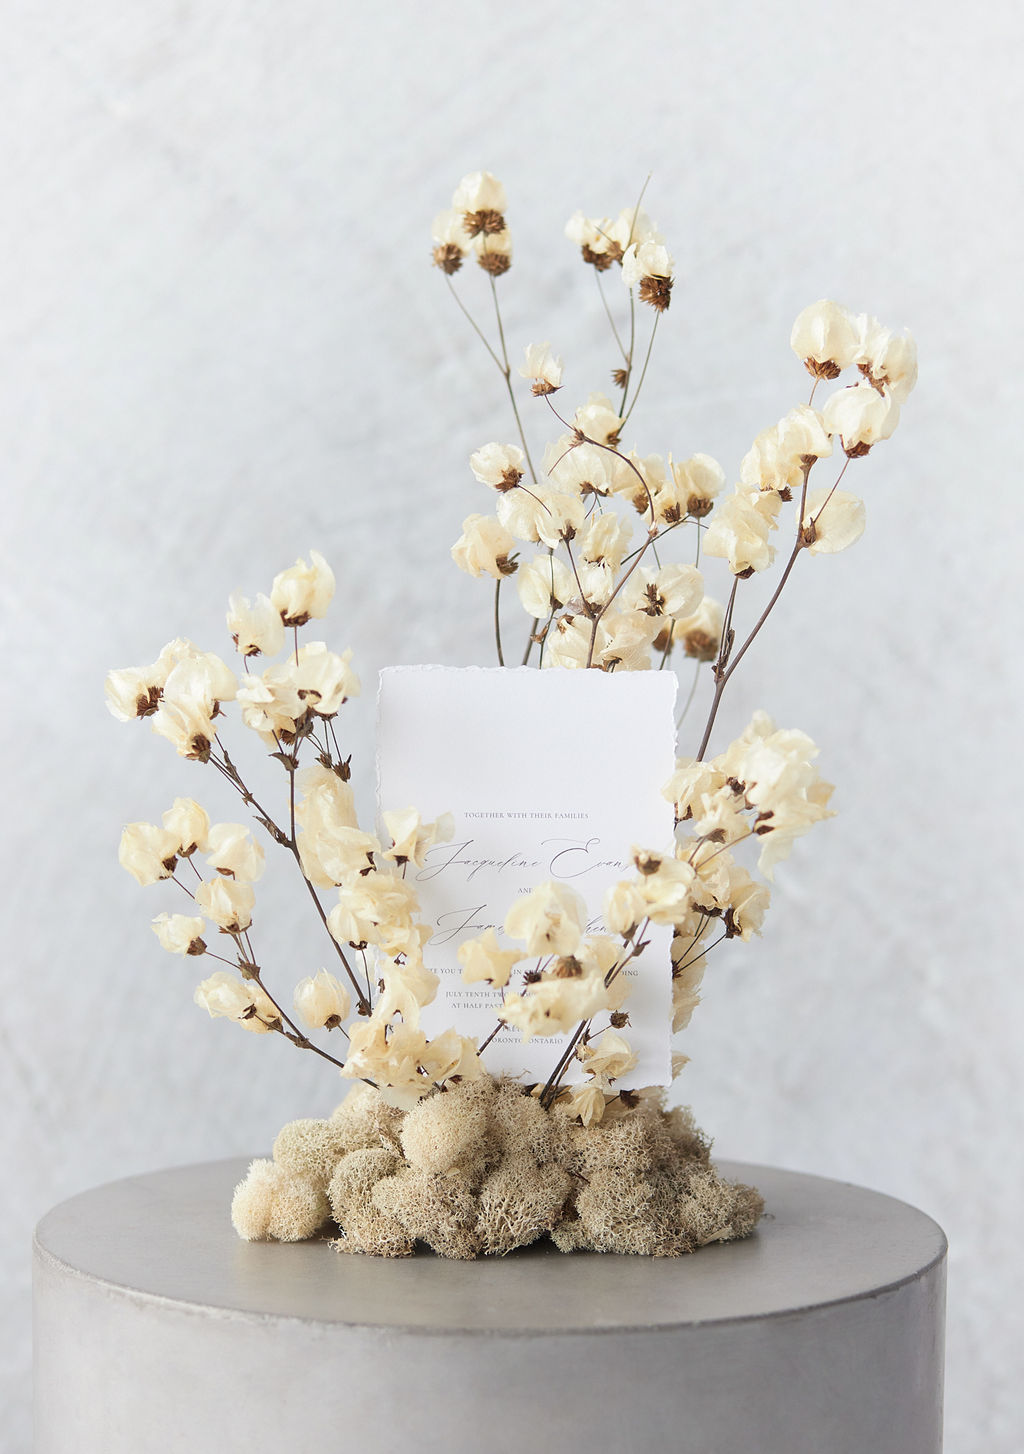 Beige dry flower stand with an event invitation card